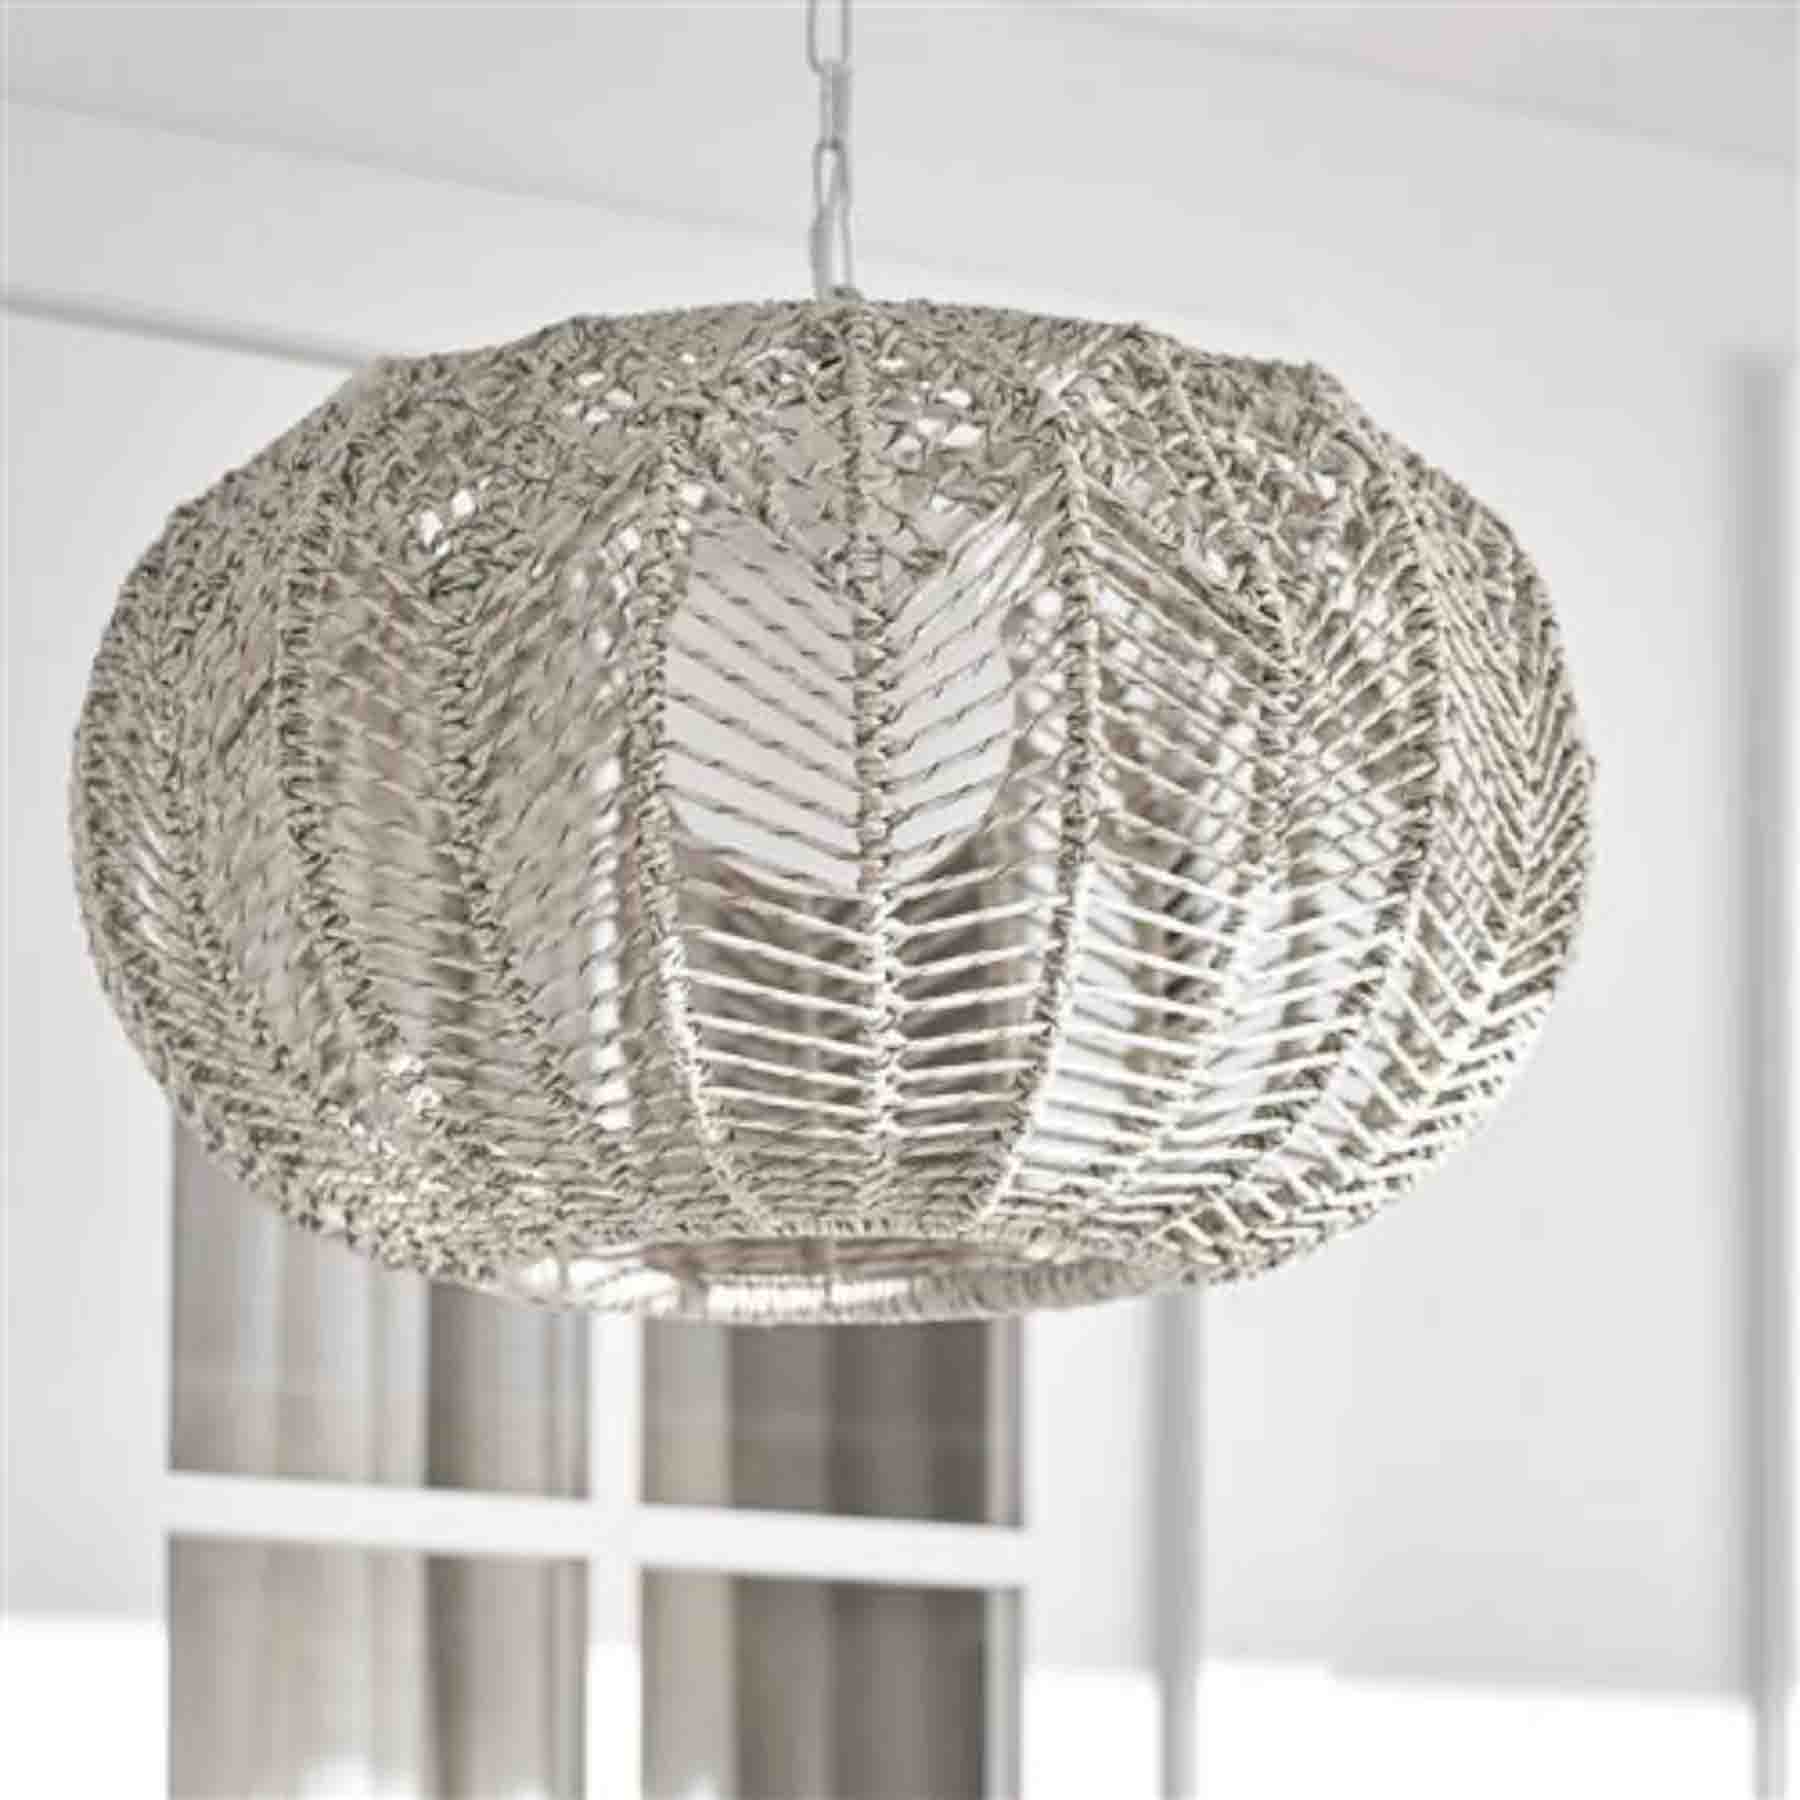 pendant lights made from synthetic rattan provide exceptional durability and resilience for outdoor use